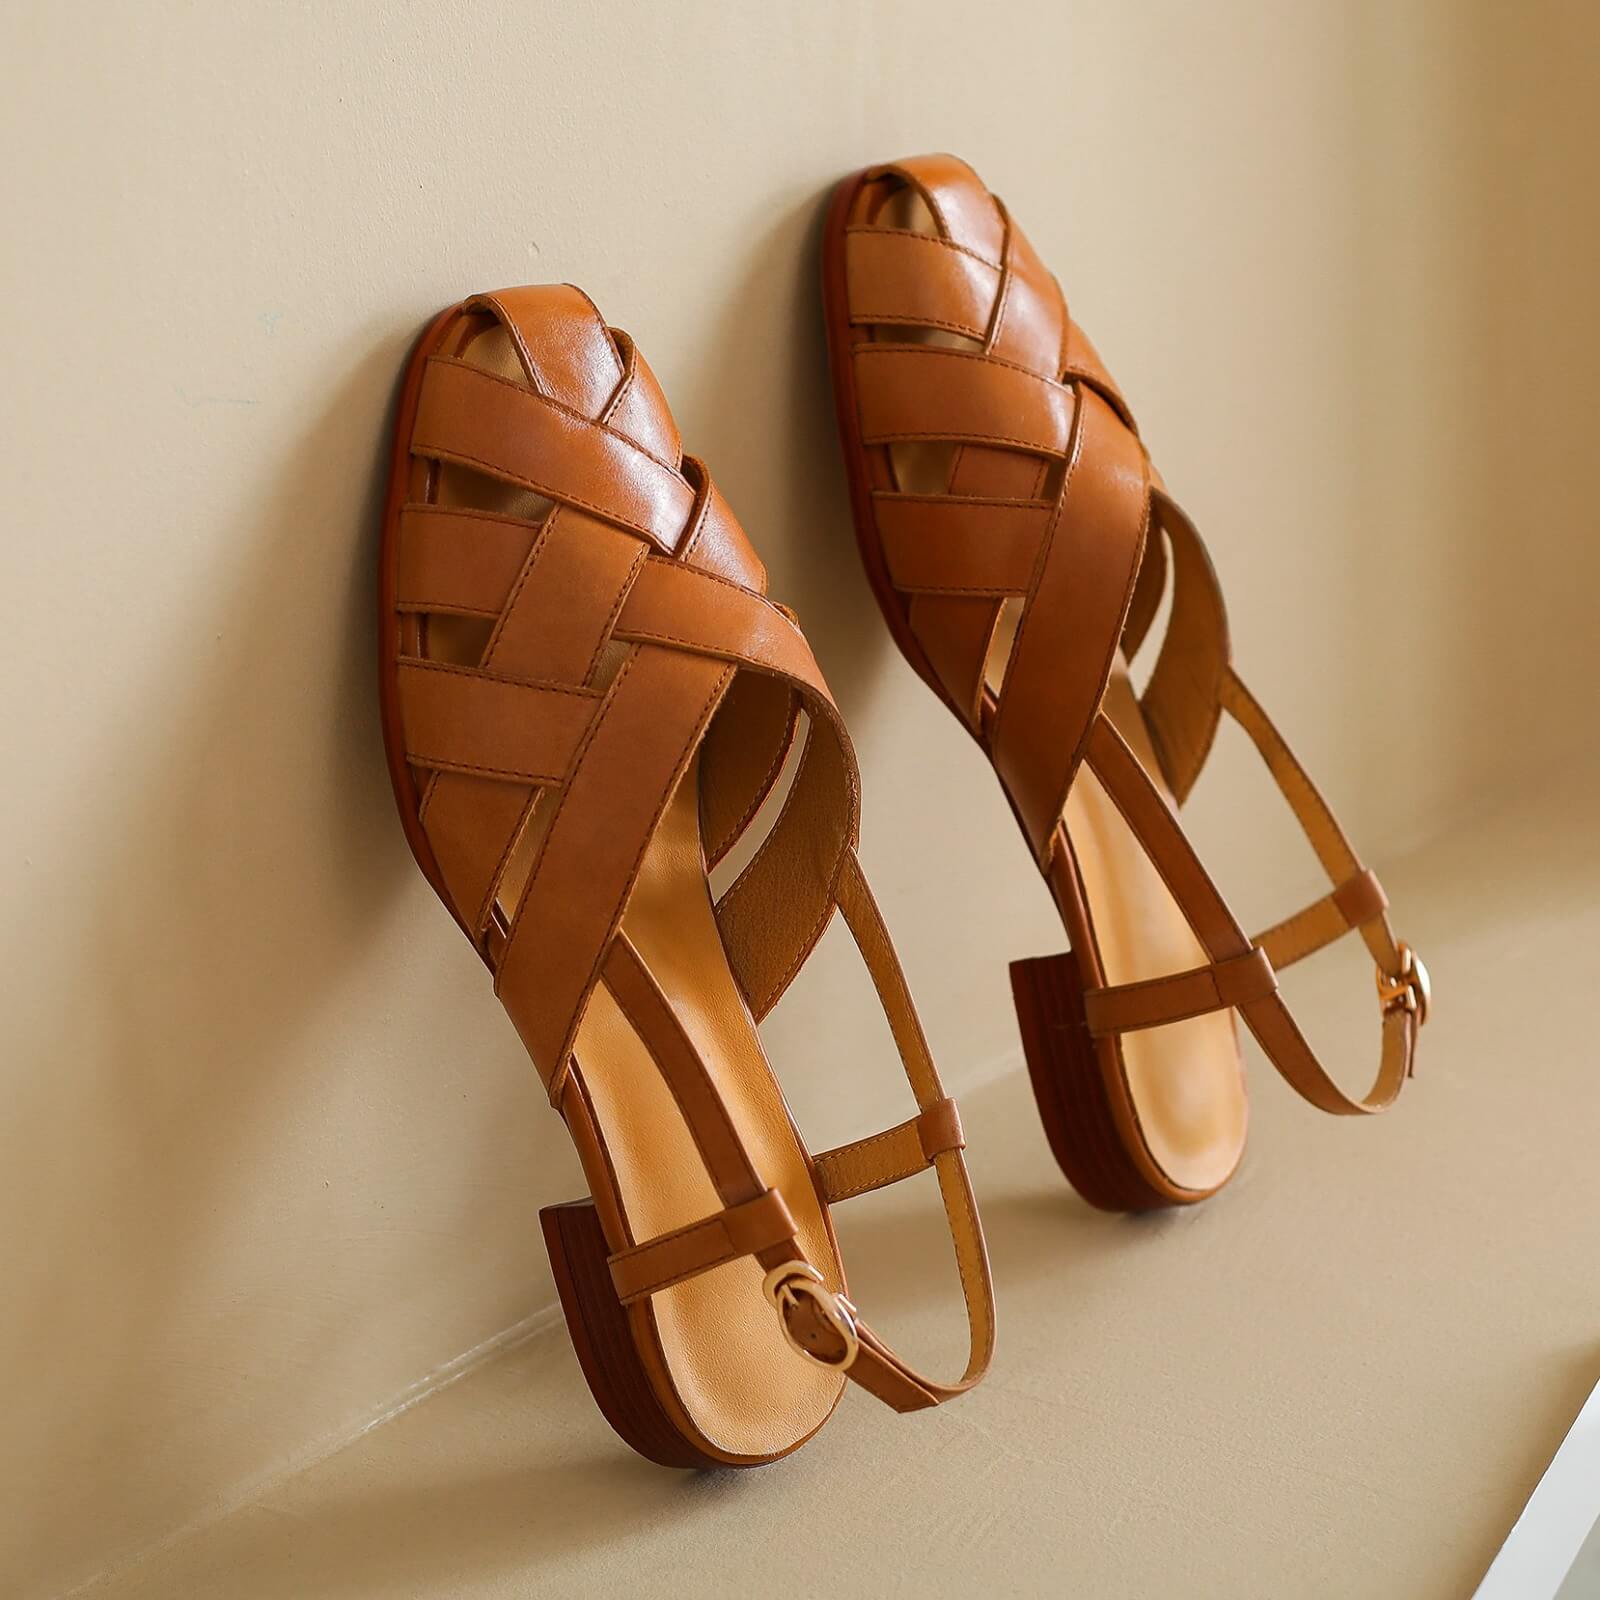 Leather sandals, Flat sandals, Strappy sandals